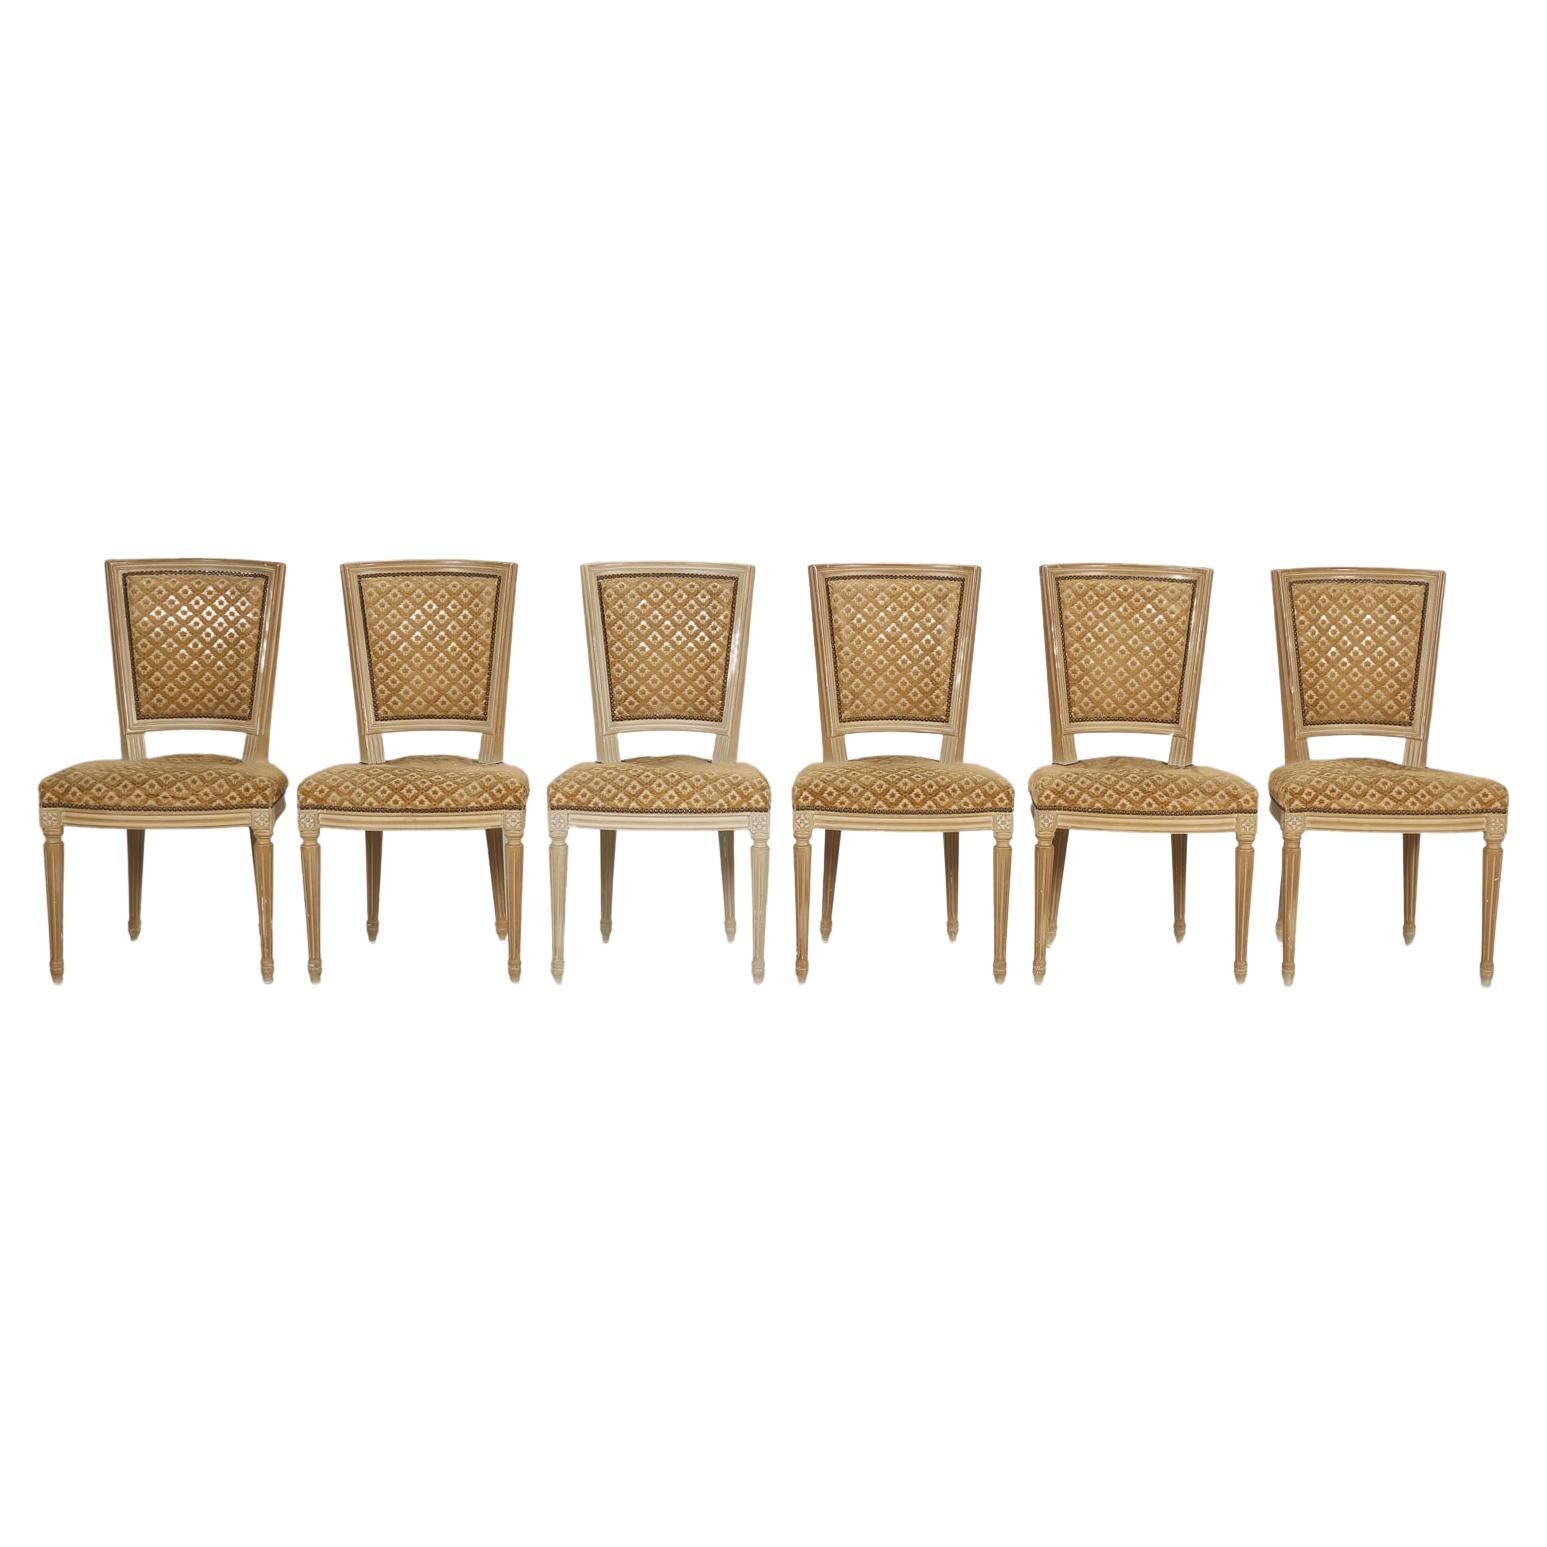 French Set of (6) Louis XVI Style Dining Chairs in Original Paint Unrestored